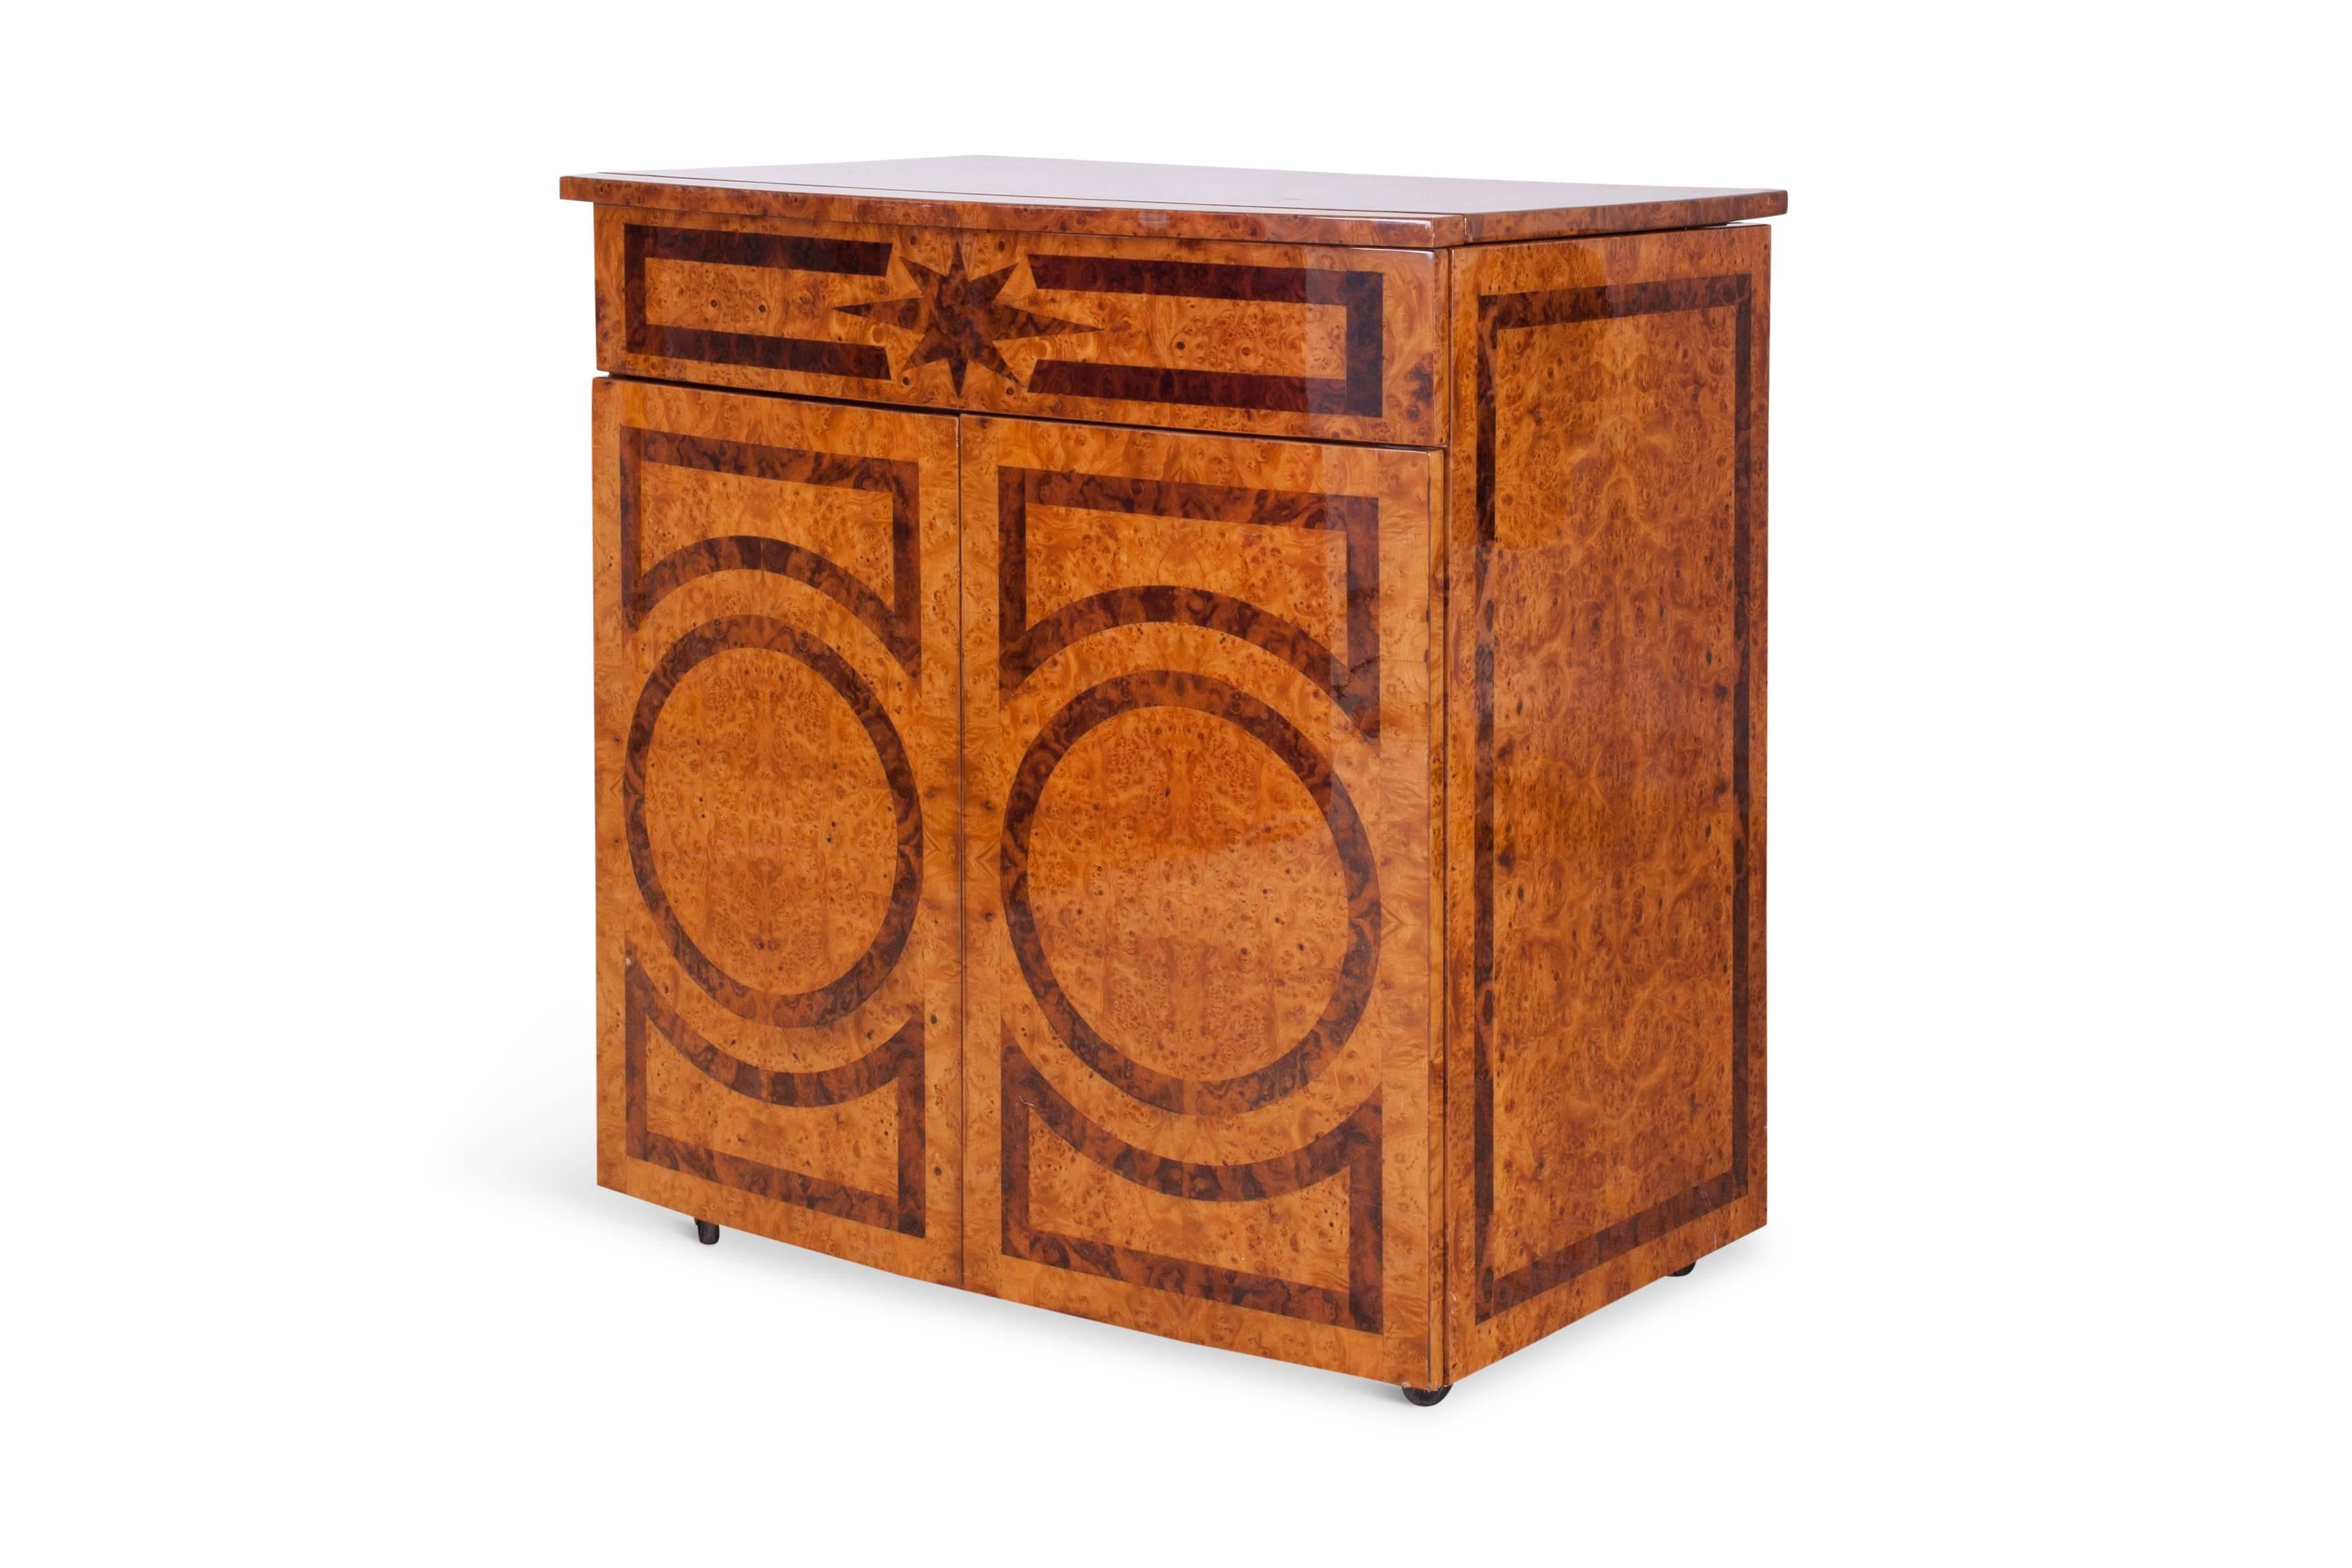 Mid-century modern dry  bar cabinet with a fantastic burl inlay exterior

A small button on the side makes the bar unit 
rise and present a large space for drinks and all attributes

Brass hinges and details complete the design

A true showpiece for